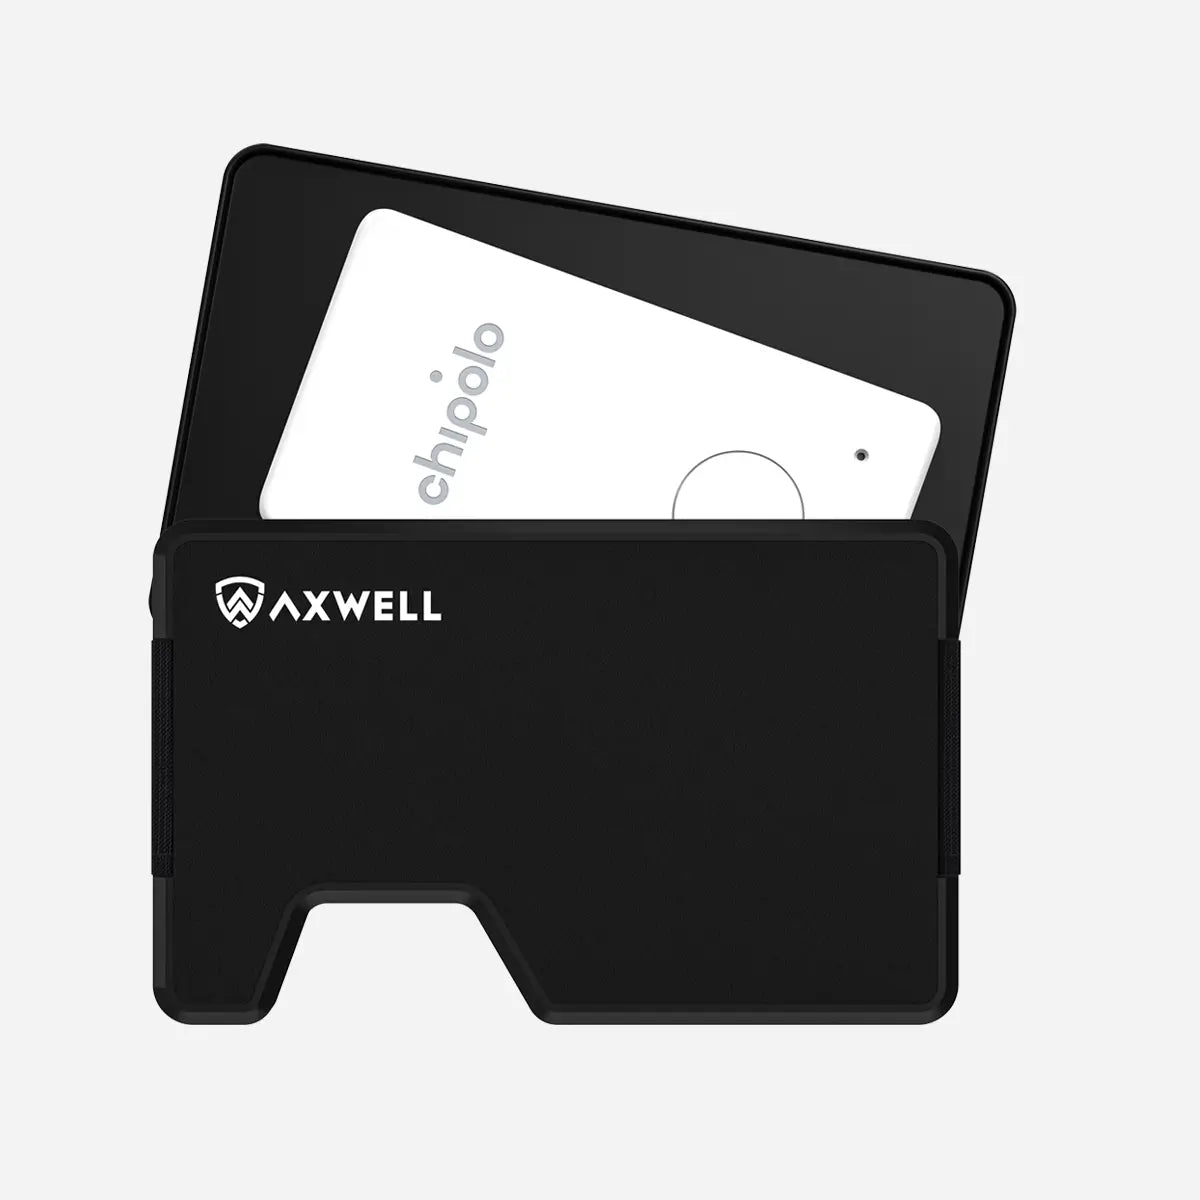 Axwell x Chipolo - Wallet Tracker